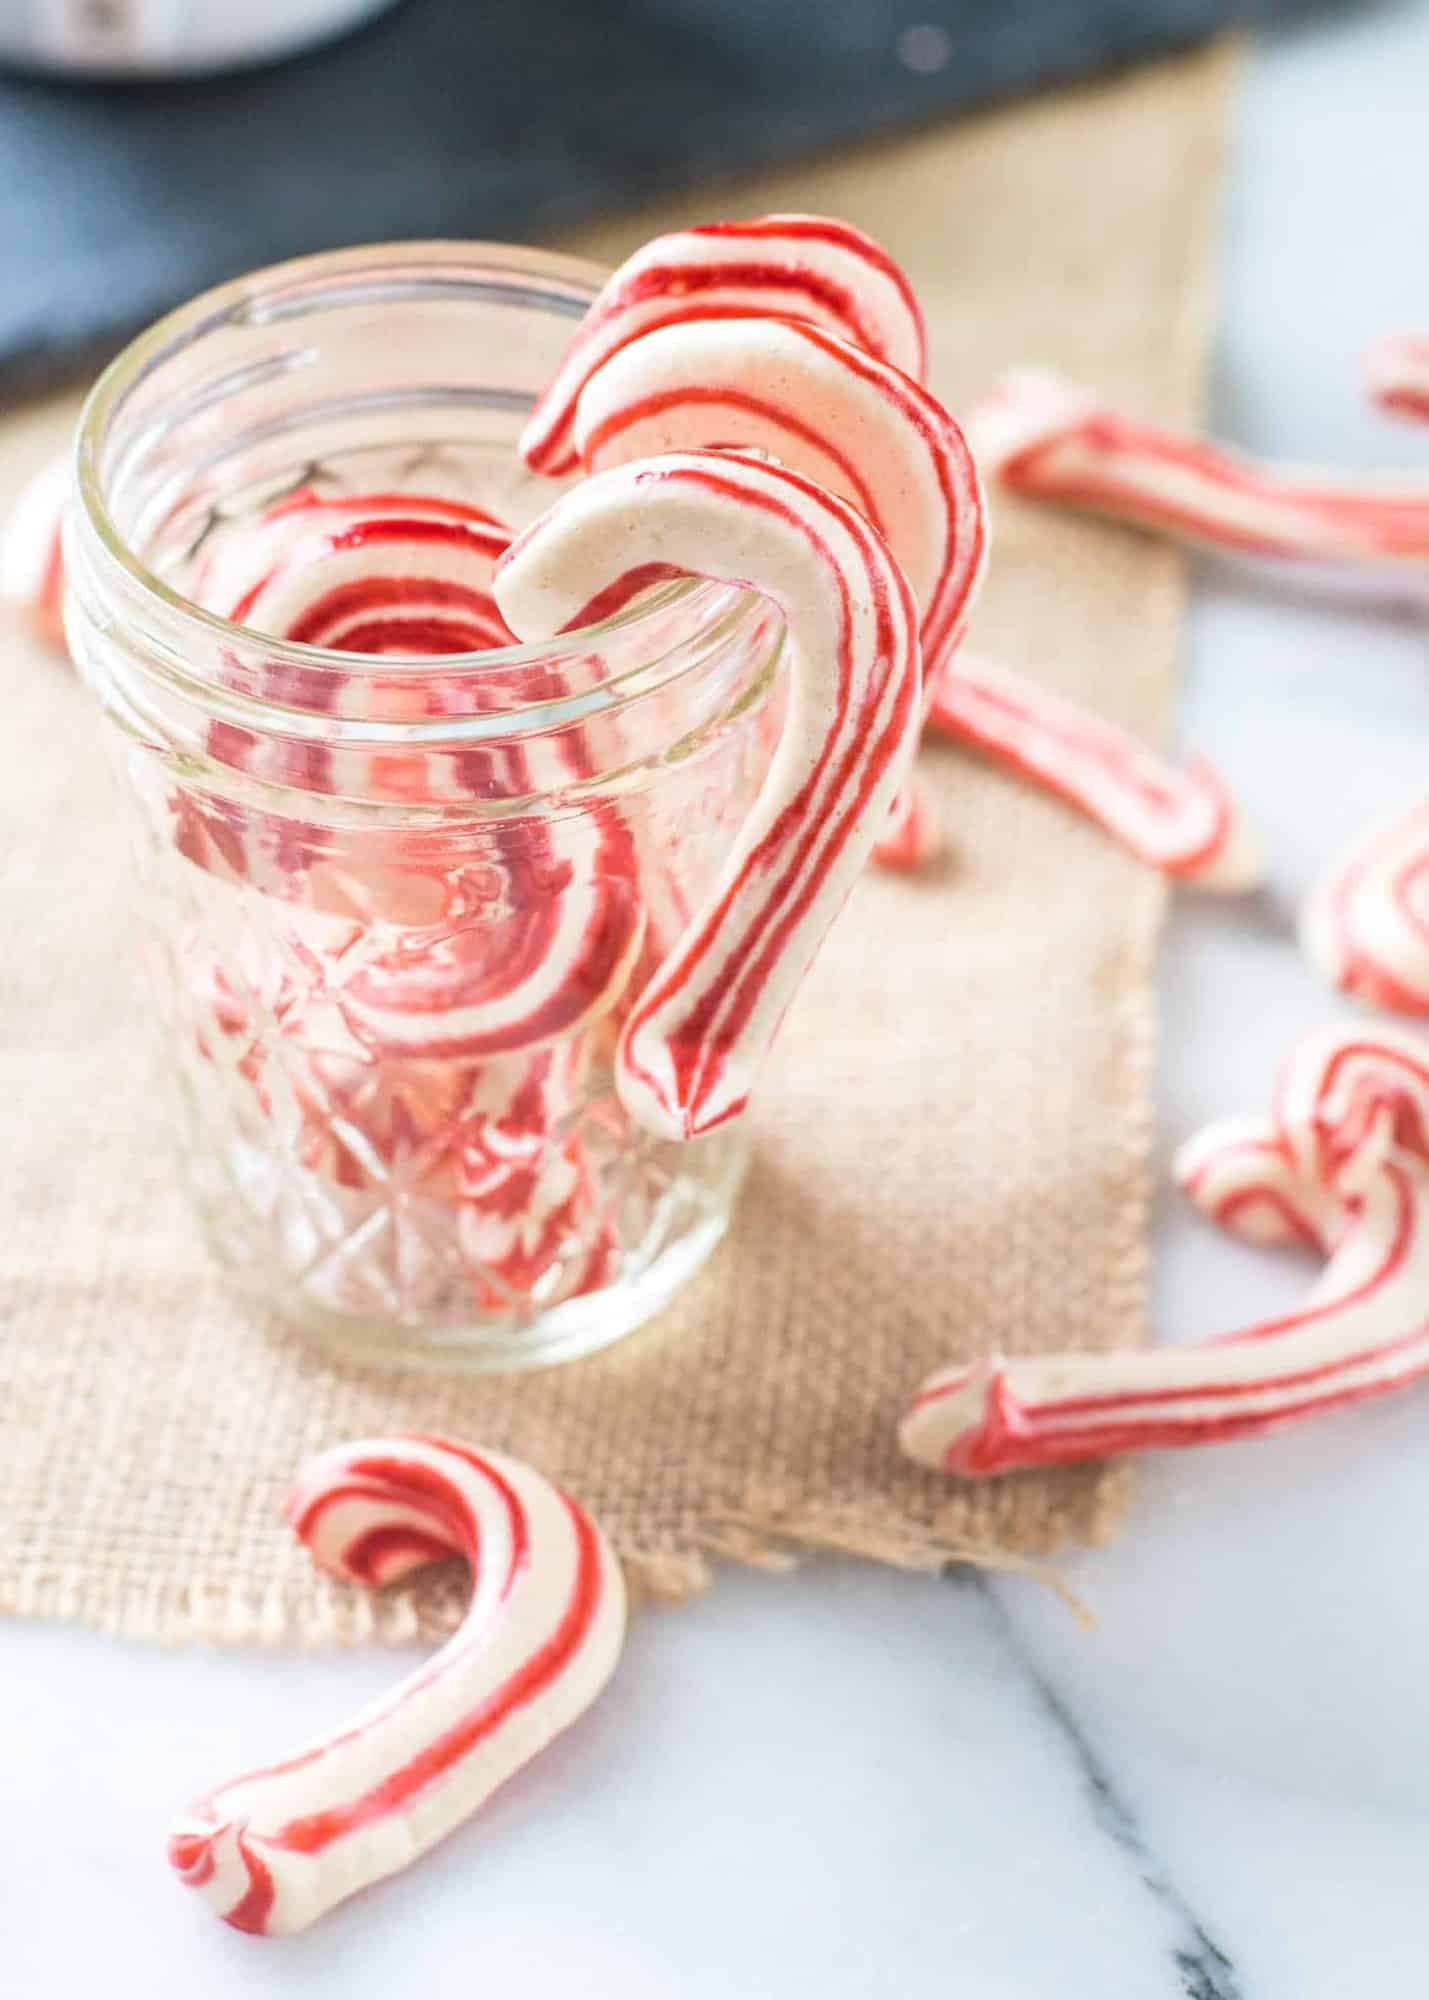 candy cane shaped meringues on a glass jar